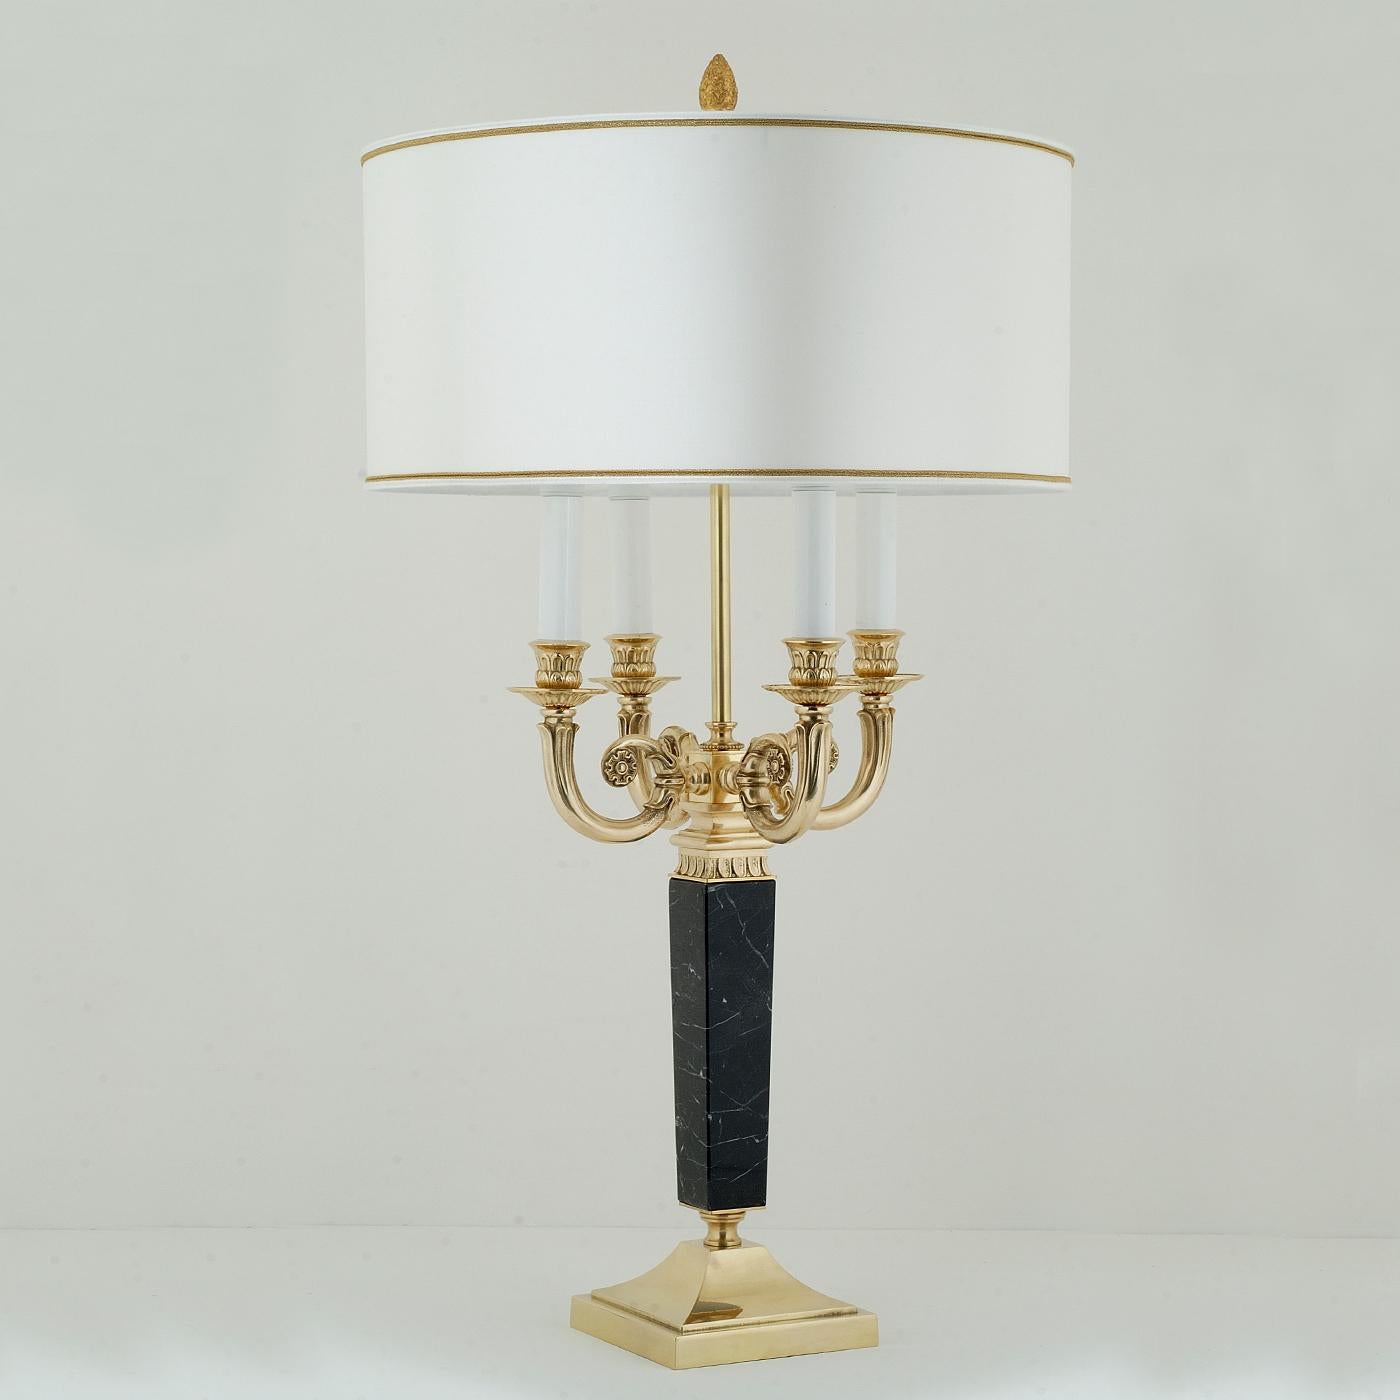 Modern Miriam Table Lamp by CosmoTre